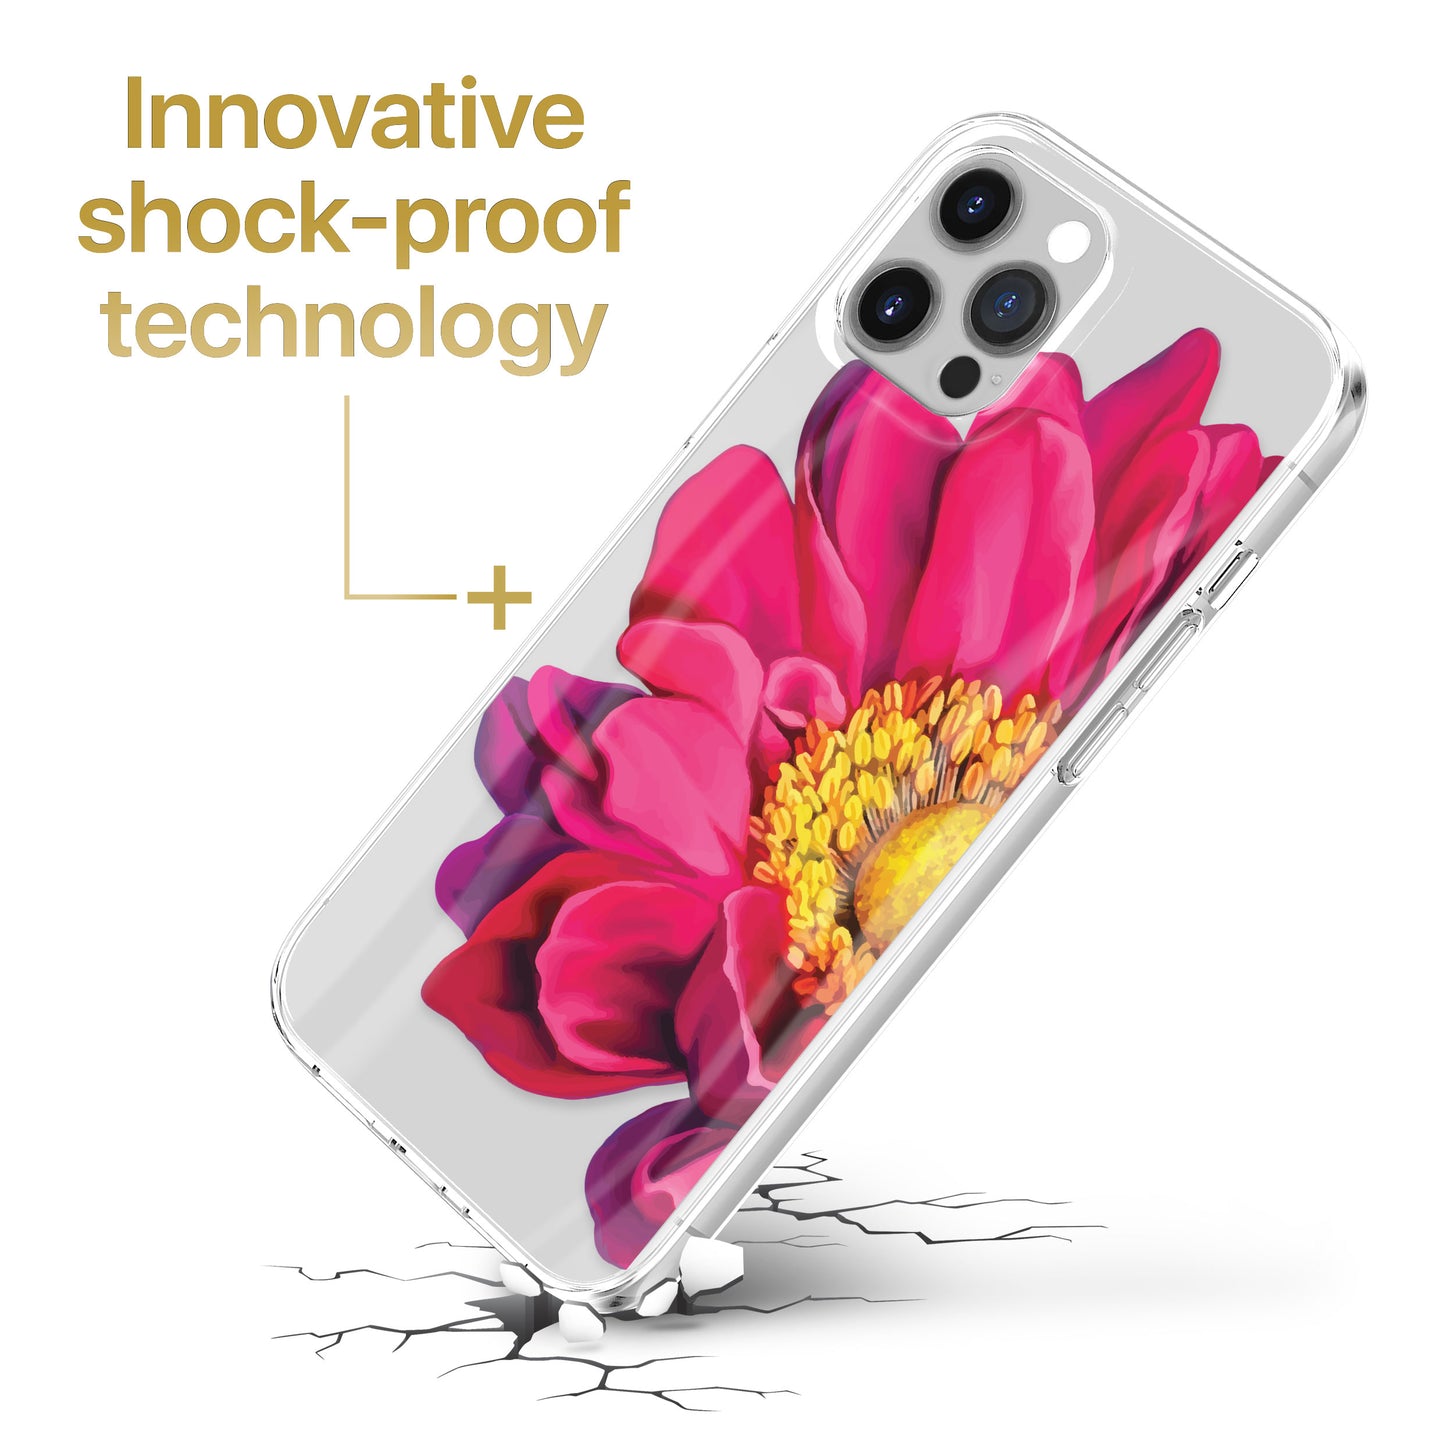 TPU Clear case with (Spring Flower) Design for iPhone & Samsung Phones